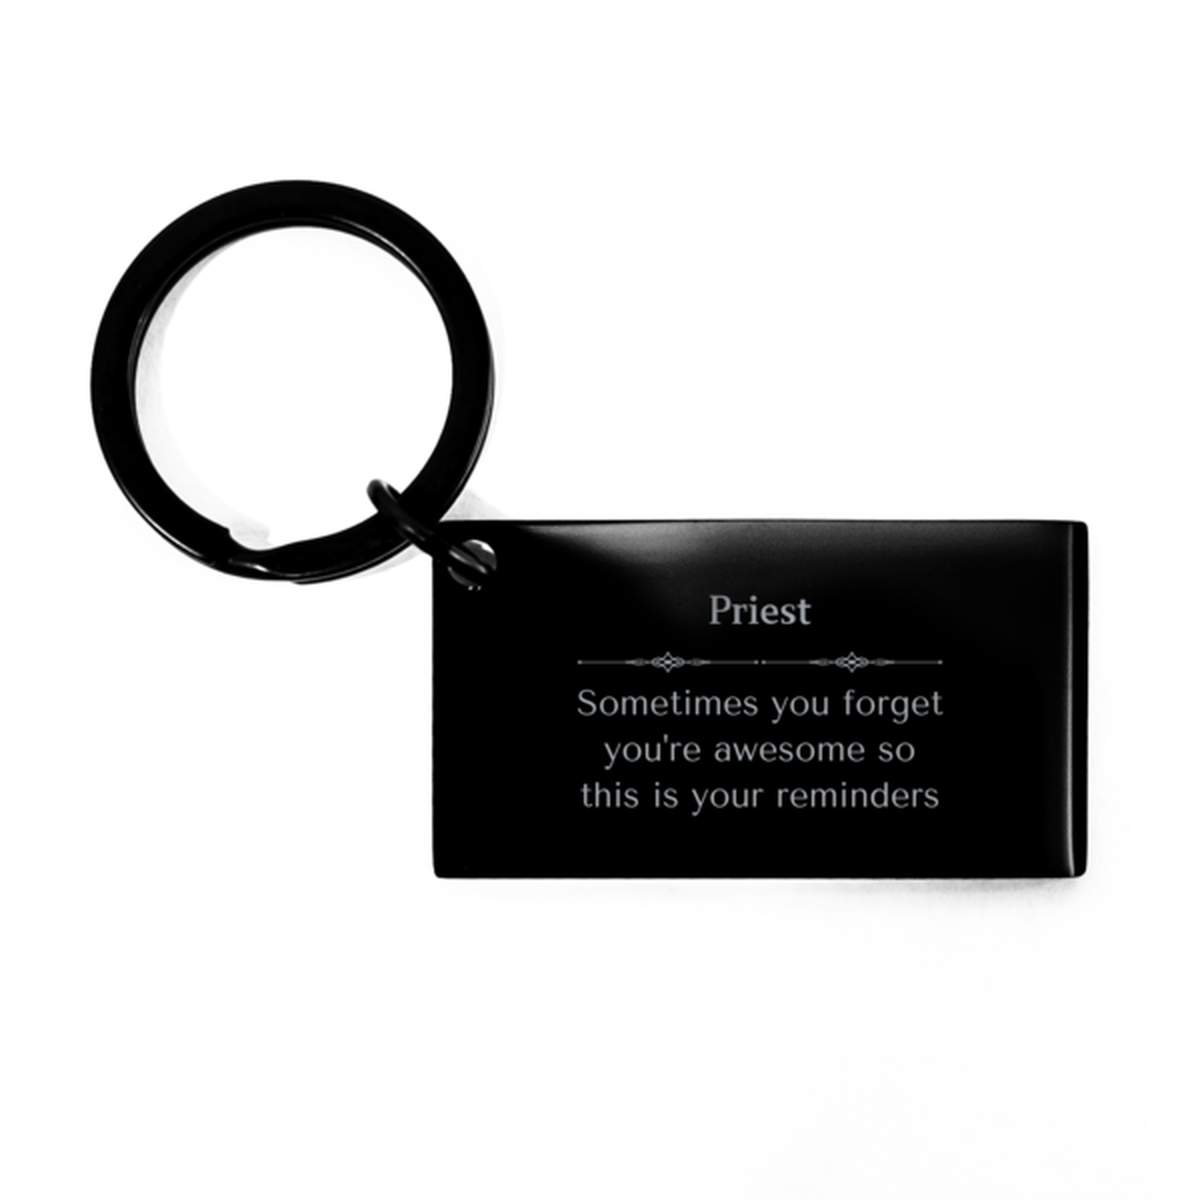 Sentimental Priest Keychain, Sheriff Sometimes you forget you're awesome so this is your reminders, Graduation Christmas Birthday Gifts for Priest, Men, Women, Coworkers